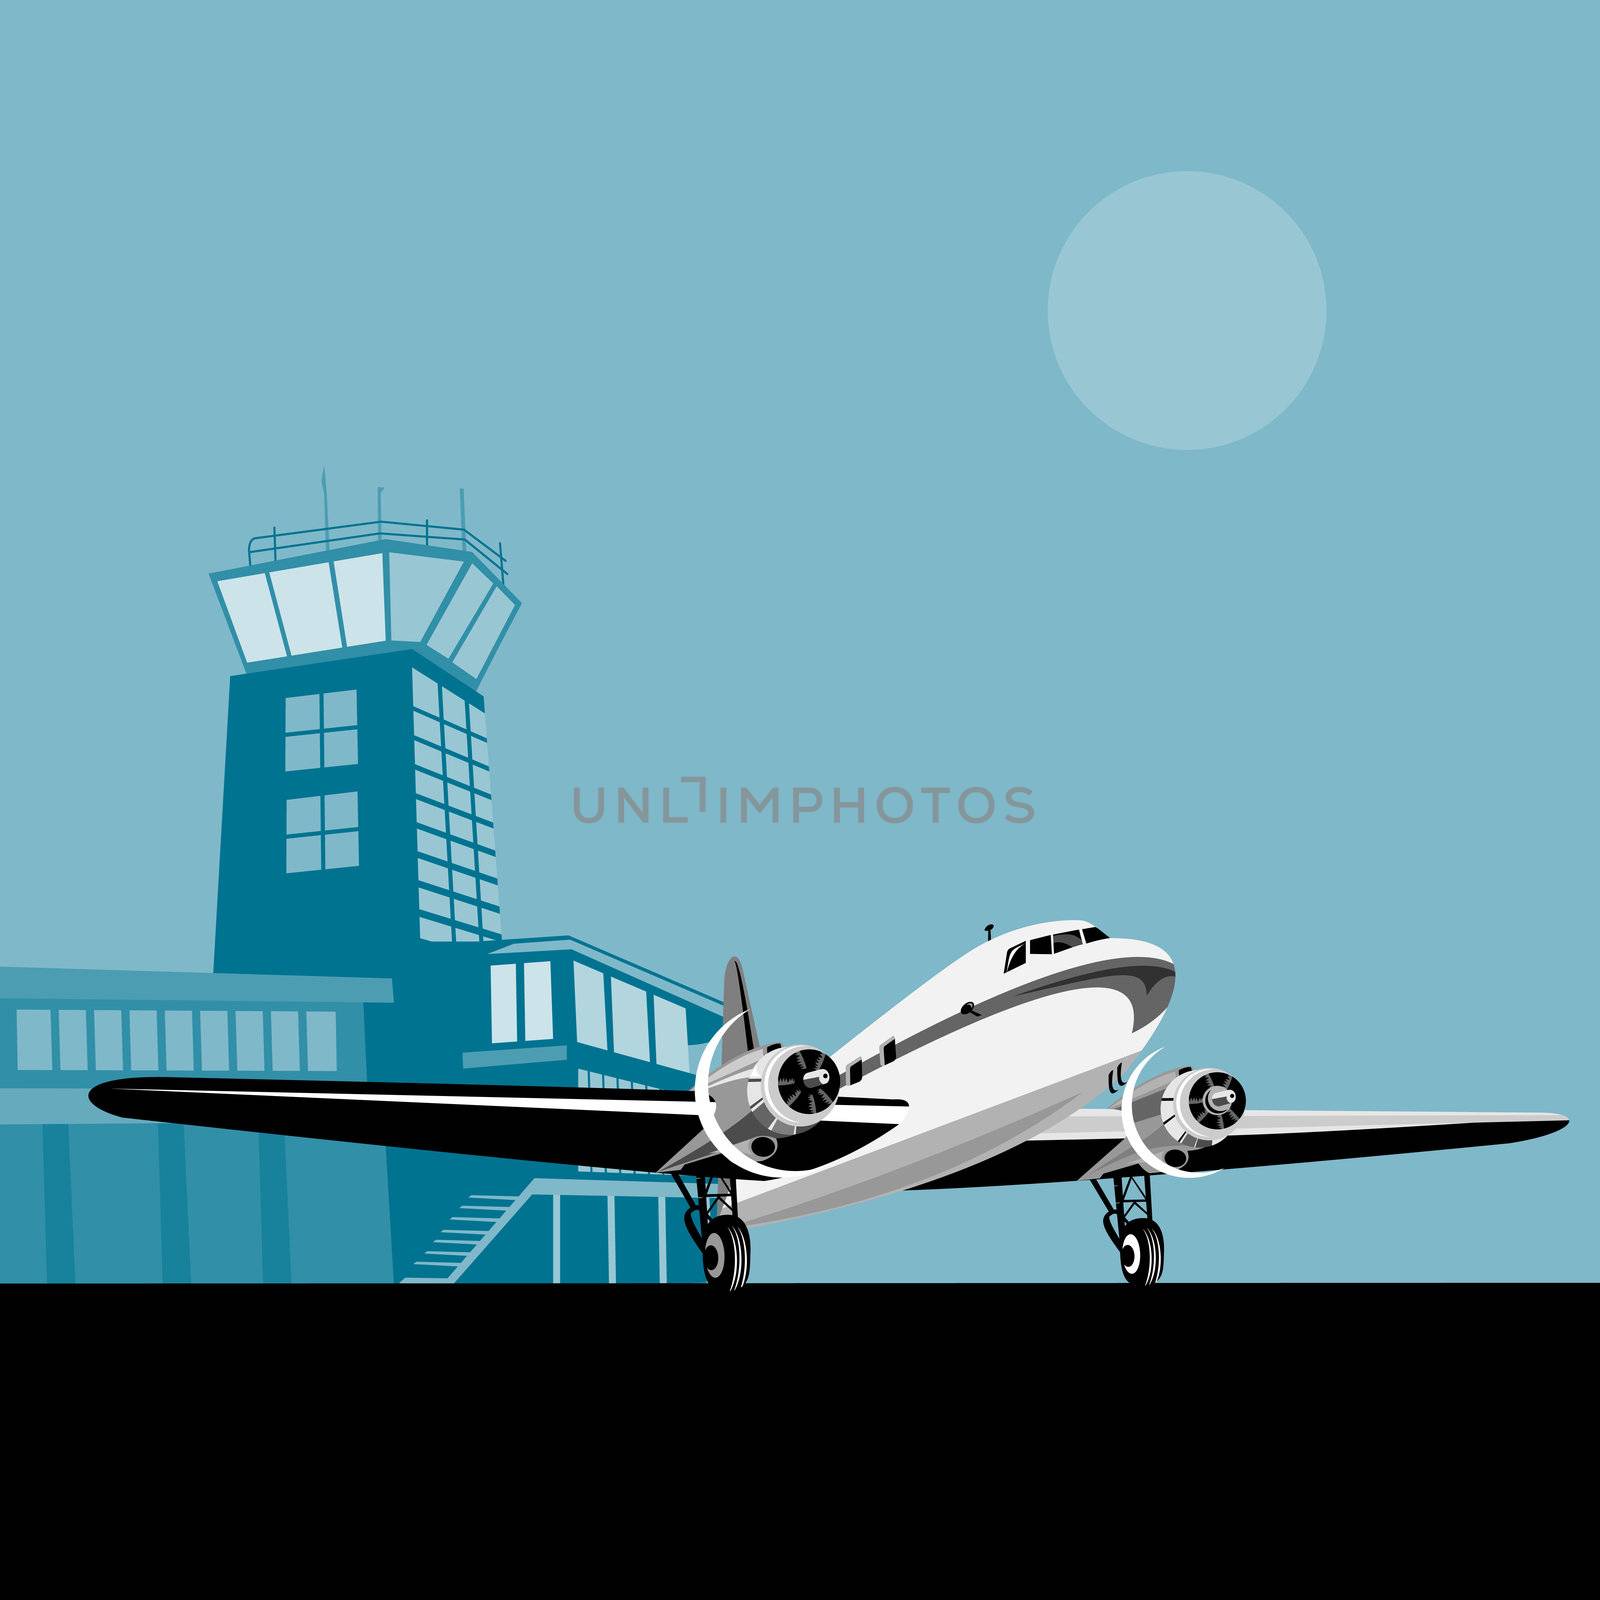 illustration of a propeller airplane airliner on runway airport  isolated background